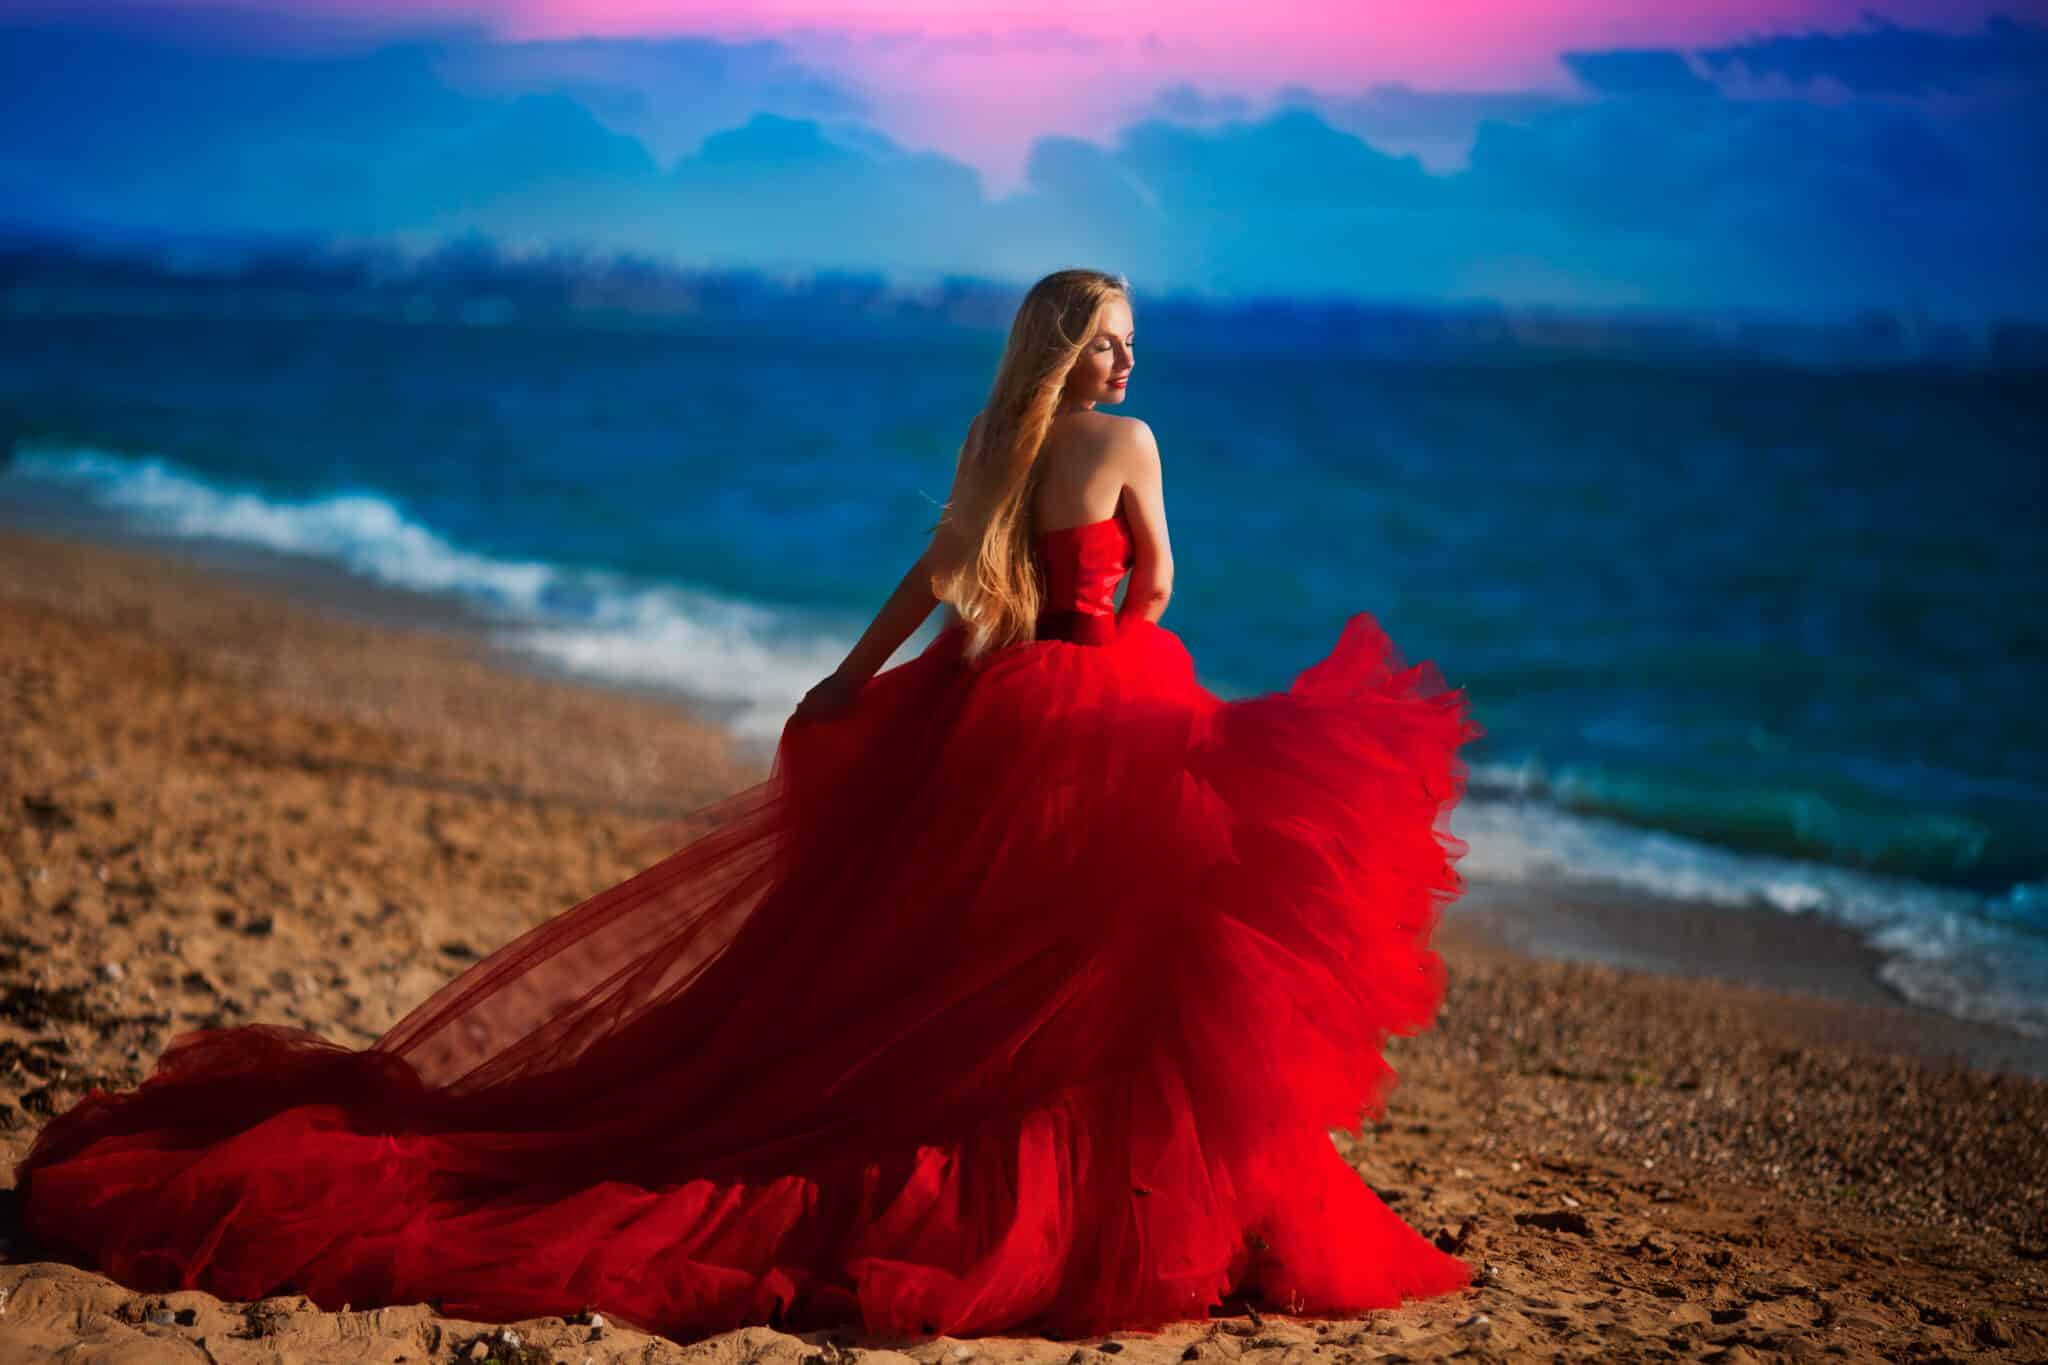 a woman in a red dress on the beach